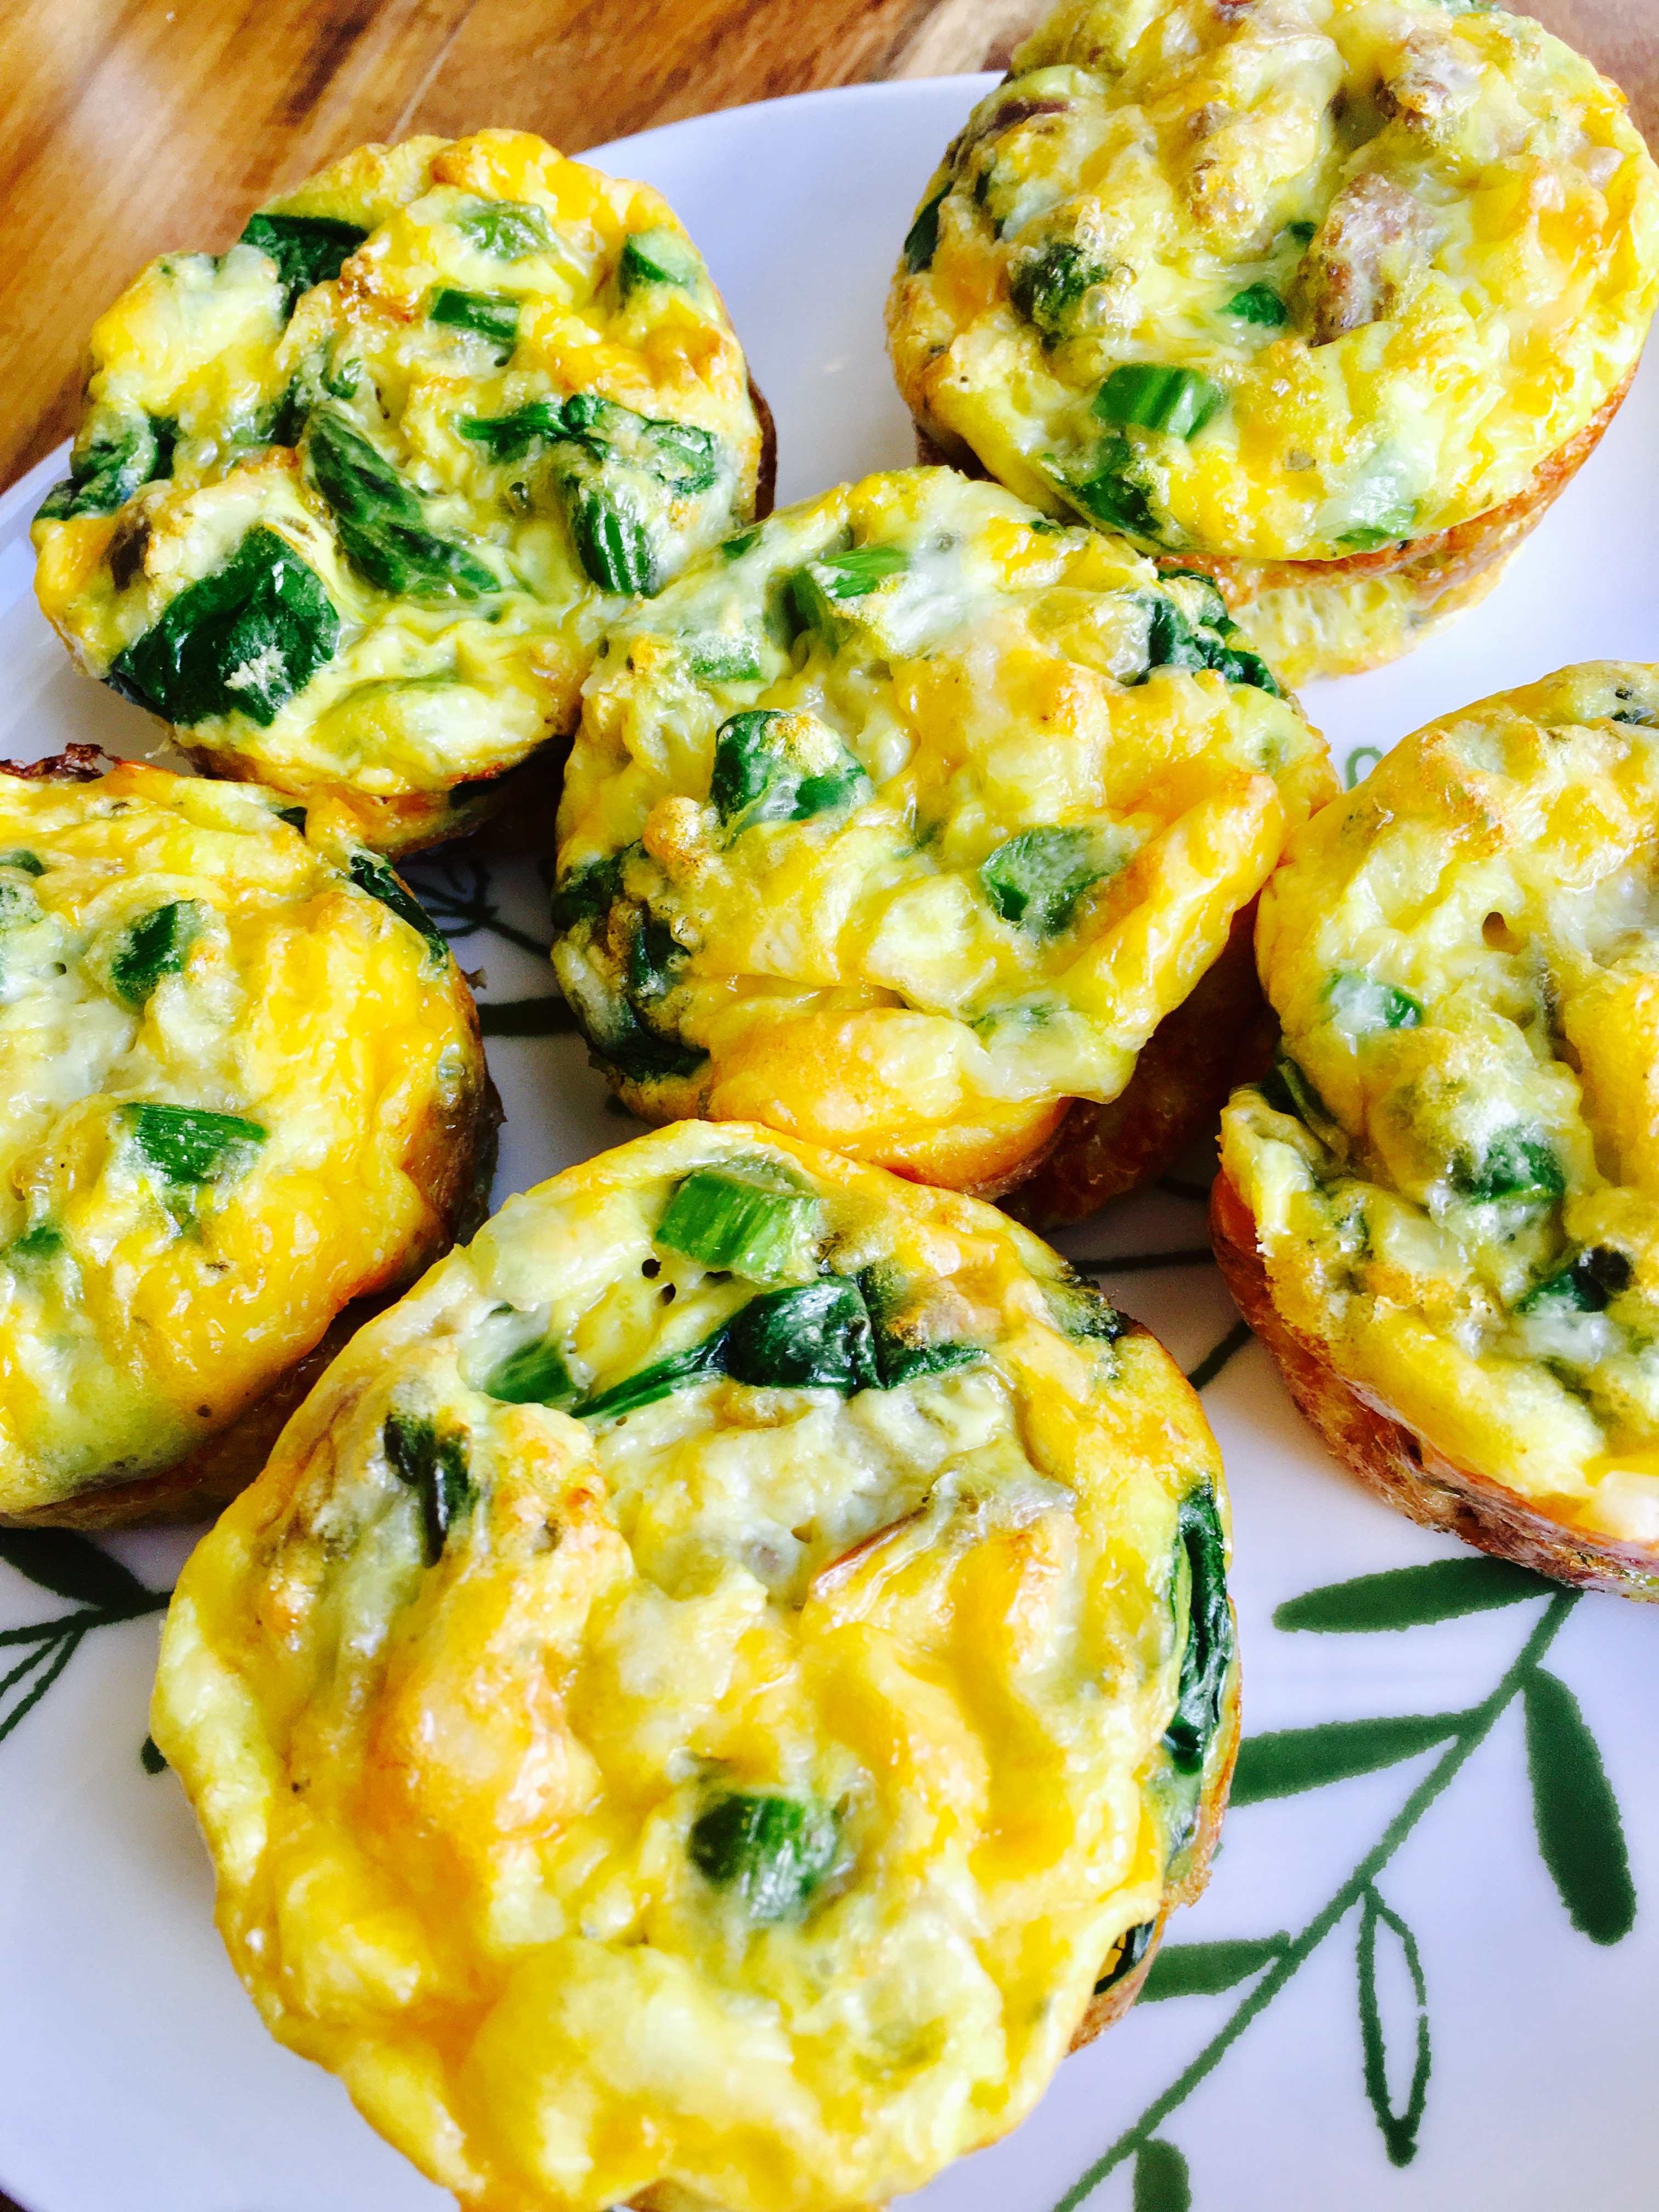 Egg muffins with turkey sausage and asparagus are easy to make and even easier to eat! They can be made ahead of time and reheated for the perfect grab and go breakfast.